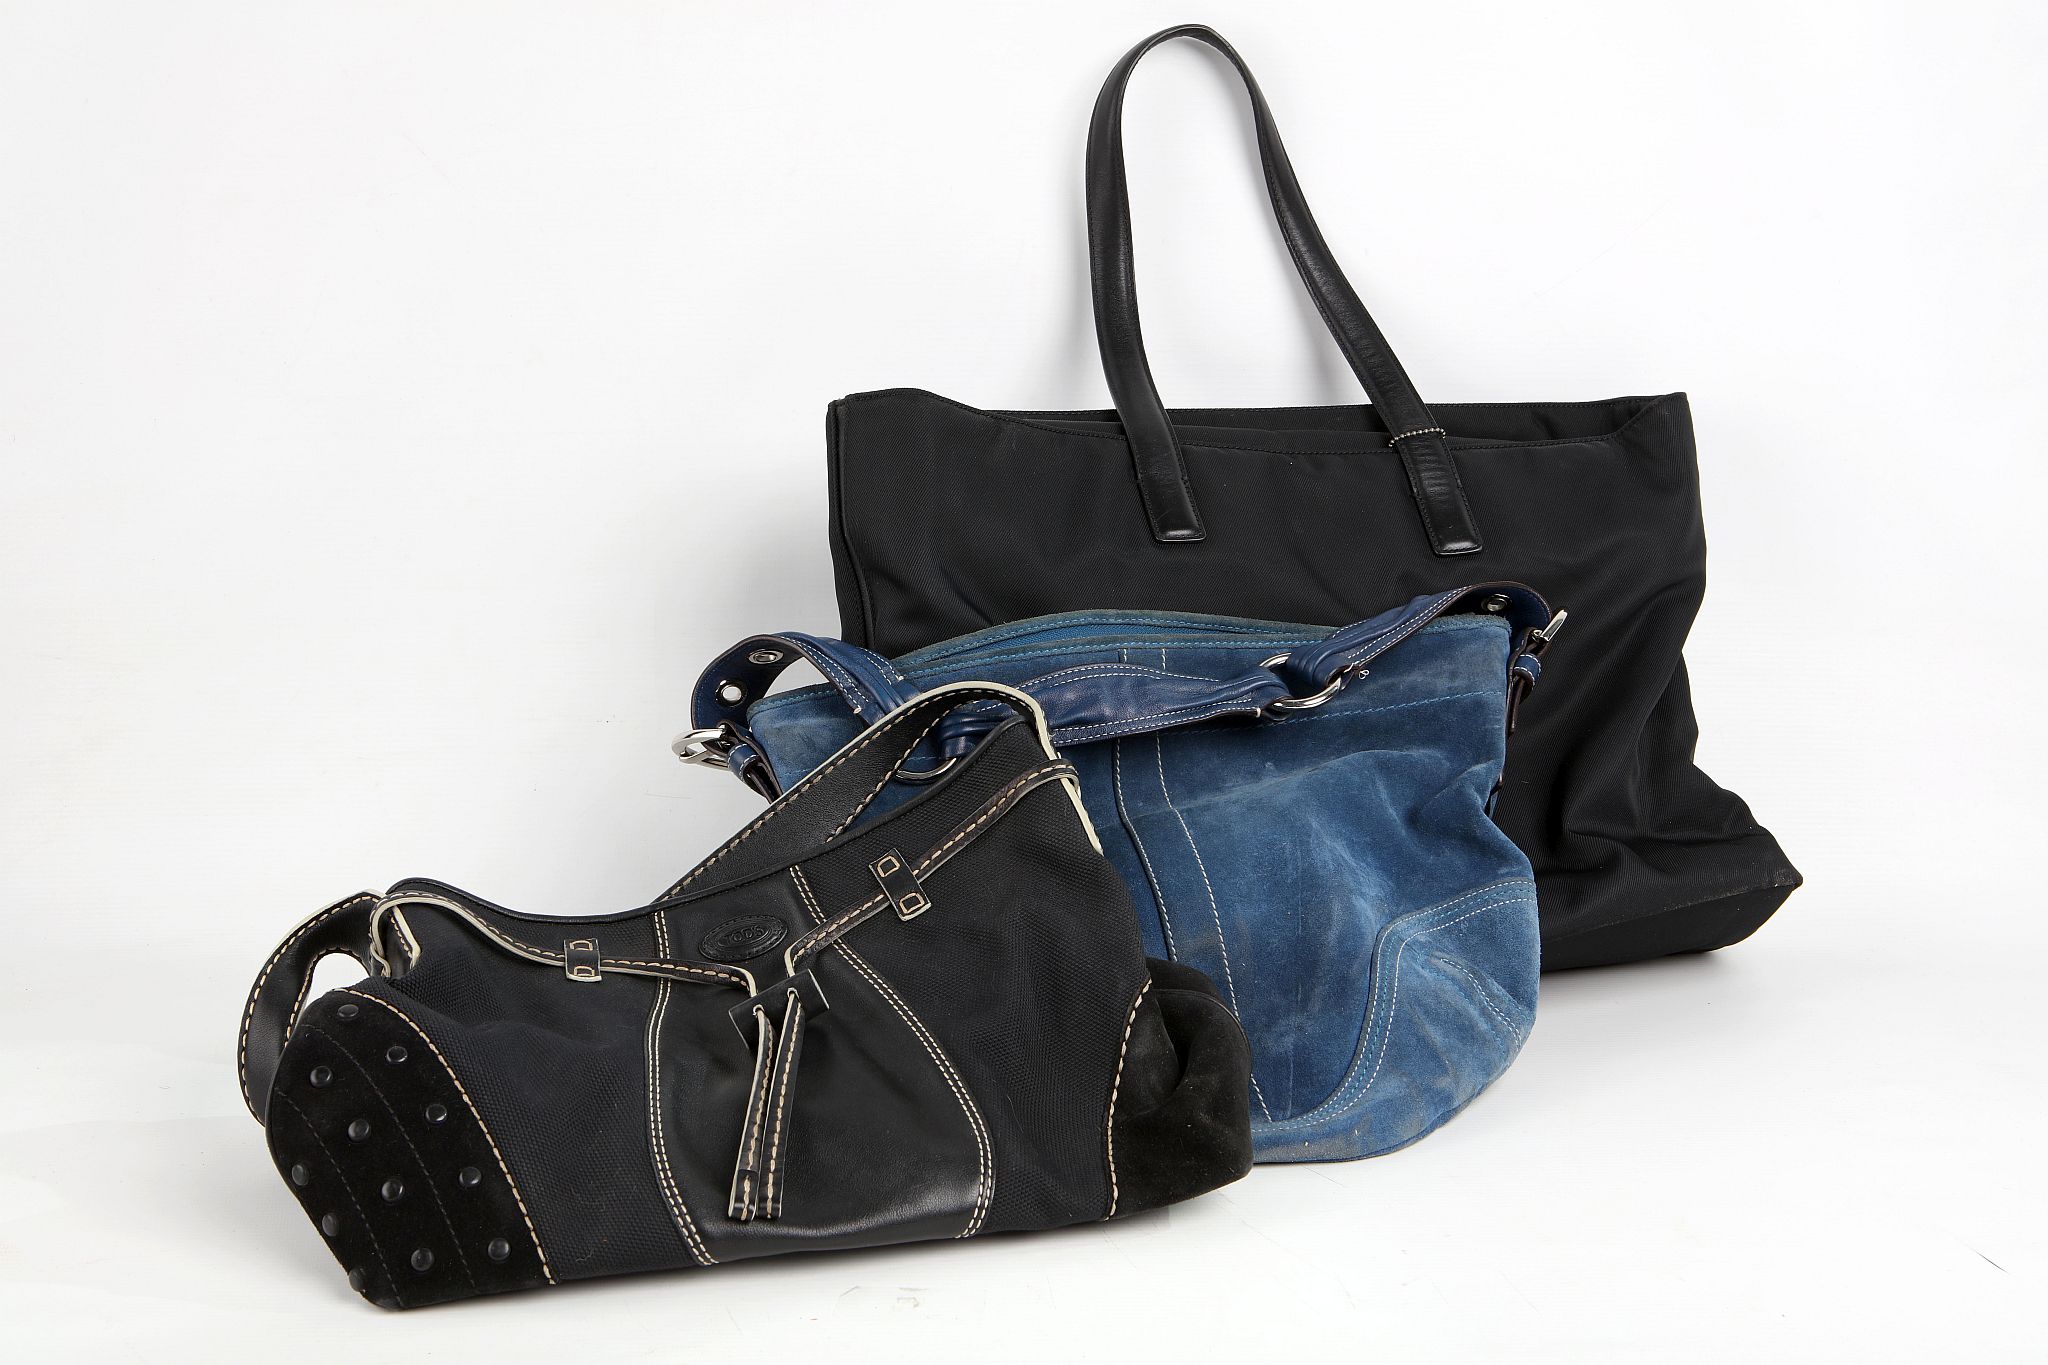 TWO COACH HANDBAGS, one a black office example, the other blue suede, together with a black Tod's